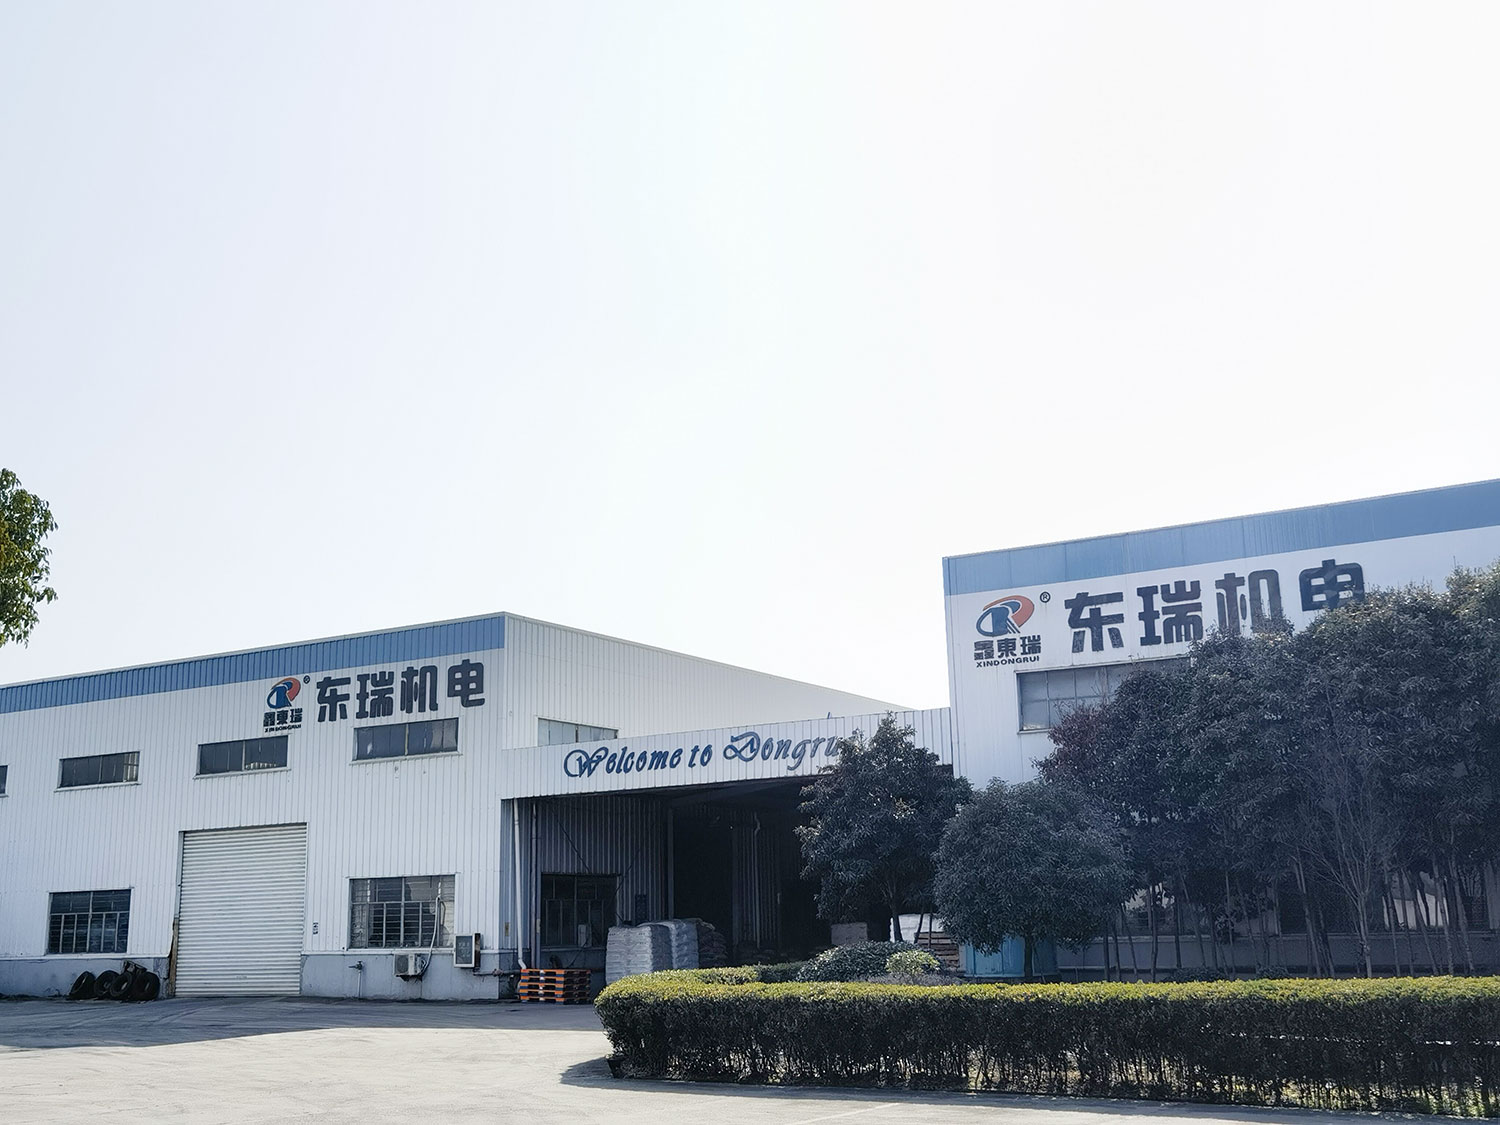 Main gate of the factory